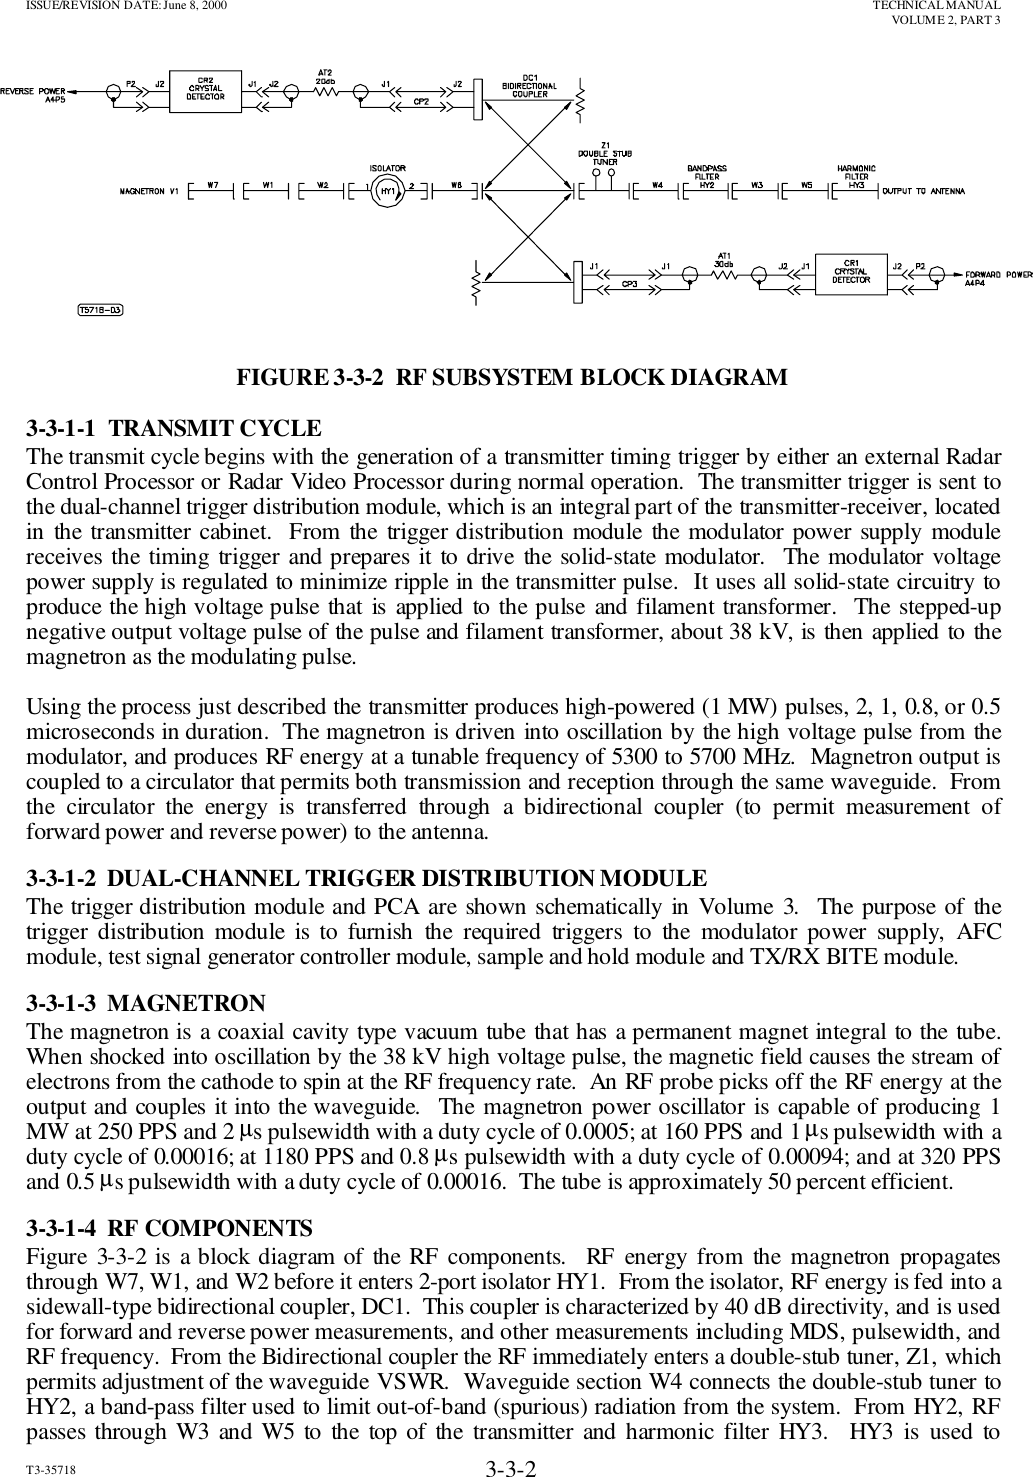 ISSUE/REVISION DATE: June 8, 2000 TECHNICAL MANUALVOLUME 2, PART 3T3-35718 3-3-2FIGURE 3-3-2  RF SUBSYSTEM BLOCK DIAGRAM3-3-1-1  TRANSMIT CYCLEThe transmit cycle begins with the generation of a transmitter timing trigger by either an external RadarControl Processor or Radar Video Processor during normal operation.  The transmitter trigger is sent tothe dual-channel trigger distribution module, which is an integral part of the transmitter-receiver, locatedin the transmitter cabinet.  From the trigger distribution module the modulator power supply modulereceives the timing trigger and prepares it to drive the solid-state modulator.  The modulator voltagepower supply is regulated to minimize ripple in the transmitter pulse.  It uses all solid-state circuitry toproduce the high voltage pulse that is applied to the pulse and filament transformer.  The stepped-upnegative output voltage pulse of the pulse and filament transformer, about 38 kV, is then applied to themagnetron as the modulating pulse.Using the process just described the transmitter produces high-powered (1 MW) pulses, 2, 1, 0.8, or 0.5microseconds in duration.  The magnetron is driven into oscillation by the high voltage pulse from themodulator, and produces RF energy at a tunable frequency of 5300 to 5700 MHz.  Magnetron output iscoupled to a circulator that permits both transmission and reception through the same waveguide.  Fromthe circulator the energy is transferred through a bidirectional coupler (to permit measurement offorward power and reverse power) to the antenna.3-3-1-2  DUAL-CHANNEL TRIGGER DISTRIBUTION MODULEThe trigger distribution module and PCA are shown schematically in Volume 3.  The purpose of thetrigger distribution module is to furnish the required triggers to the modulator power supply, AFCmodule, test signal generator controller module, sample and hold module and TX/RX BITE module.3-3-1-3  MAGNETRONThe magnetron is a coaxial cavity type vacuum tube that has a permanent magnet integral to the tube.When shocked into oscillation by the 38 kV high voltage pulse, the magnetic field causes the stream ofelectrons from the cathode to spin at the RF frequency rate.  An RF probe picks off the RF energy at theoutput and couples it into the waveguide.  The magnetron power oscillator is capable of producing 1MW at 250 PPS and 2 µs pulsewidth with a duty cycle of 0.0005; at 160 PPS and 1 µs pulsewidth with aduty cycle of 0.00016; at 1180 PPS and 0.8 µs pulsewidth with a duty cycle of 0.00094; and at 320 PPSand 0.5 µs pulsewidth with a duty cycle of 0.00016.  The tube is approximately 50 percent efficient.3-3-1-4  RF COMPONENTSFigure 3-3-2 is a block diagram of the RF components.  RF energy from the magnetron propagatesthrough W7, W1, and W2 before it enters 2-port isolator HY1.  From the isolator, RF energy is fed into asidewall-type bidirectional coupler, DC1.  This coupler is characterized by 40 dB directivity, and is usedfor forward and reverse power measurements, and other measurements including MDS, pulsewidth, andRF frequency.  From the Bidirectional coupler the RF immediately enters a double-stub tuner, Z1, whichpermits adjustment of the waveguide VSWR.  Waveguide section W4 connects the double-stub tuner toHY2, a band-pass filter used to limit out-of-band (spurious) radiation from the system.  From HY2, RFpasses through W3 and W5 to the top of the transmitter and harmonic filter HY3.  HY3 is used to